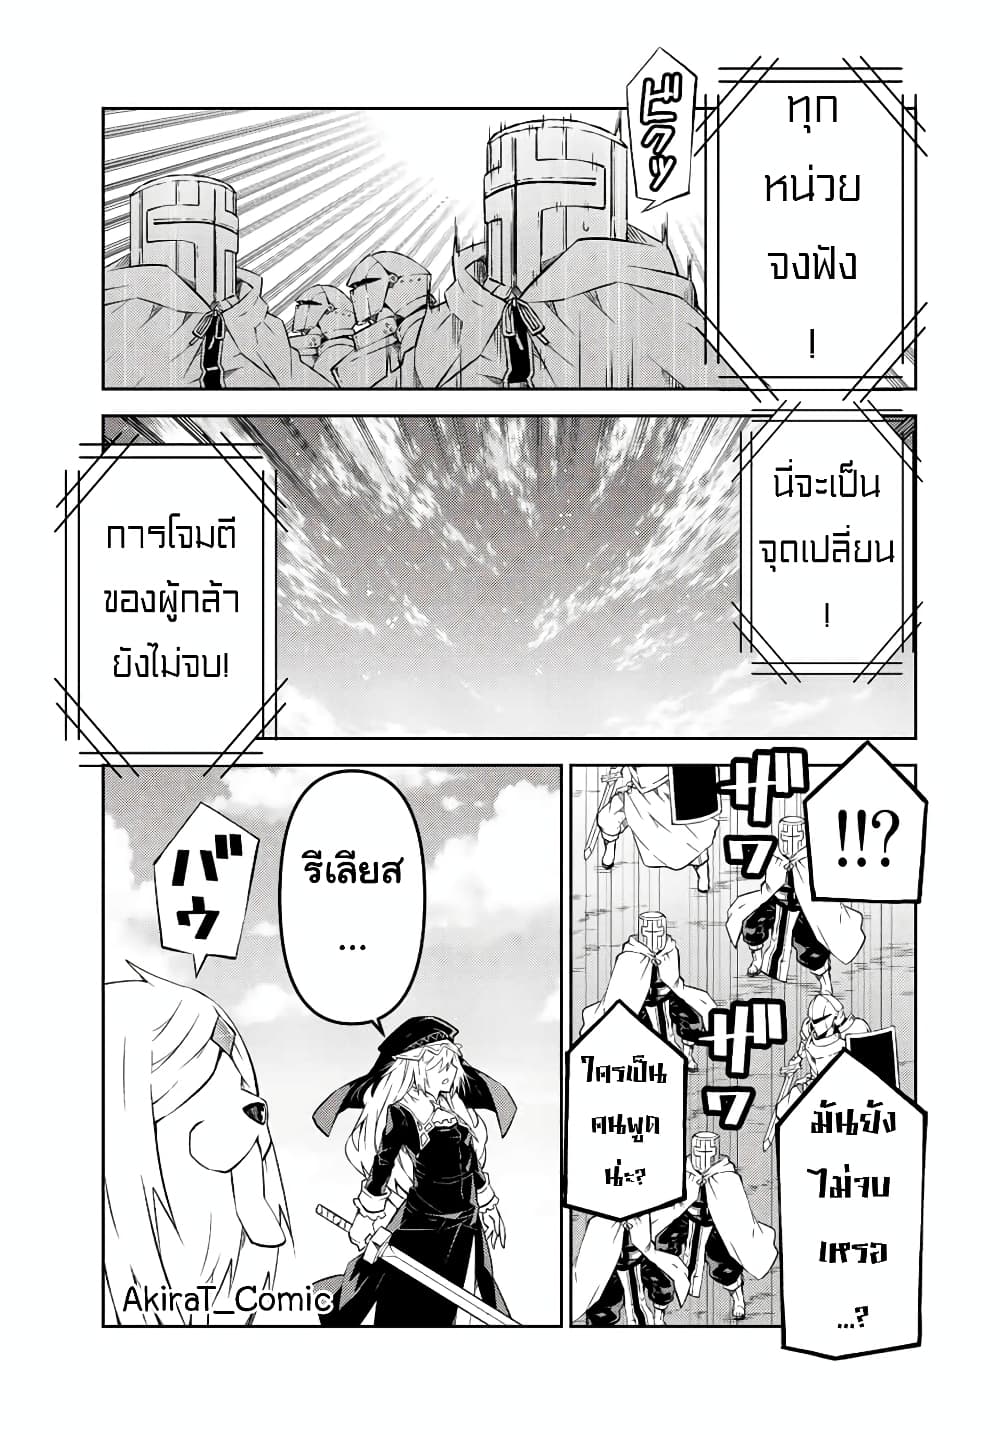 The Weakest Occupation “Blacksmith”, but It’s Actually the Strongest ตอนที่ 111 (4)